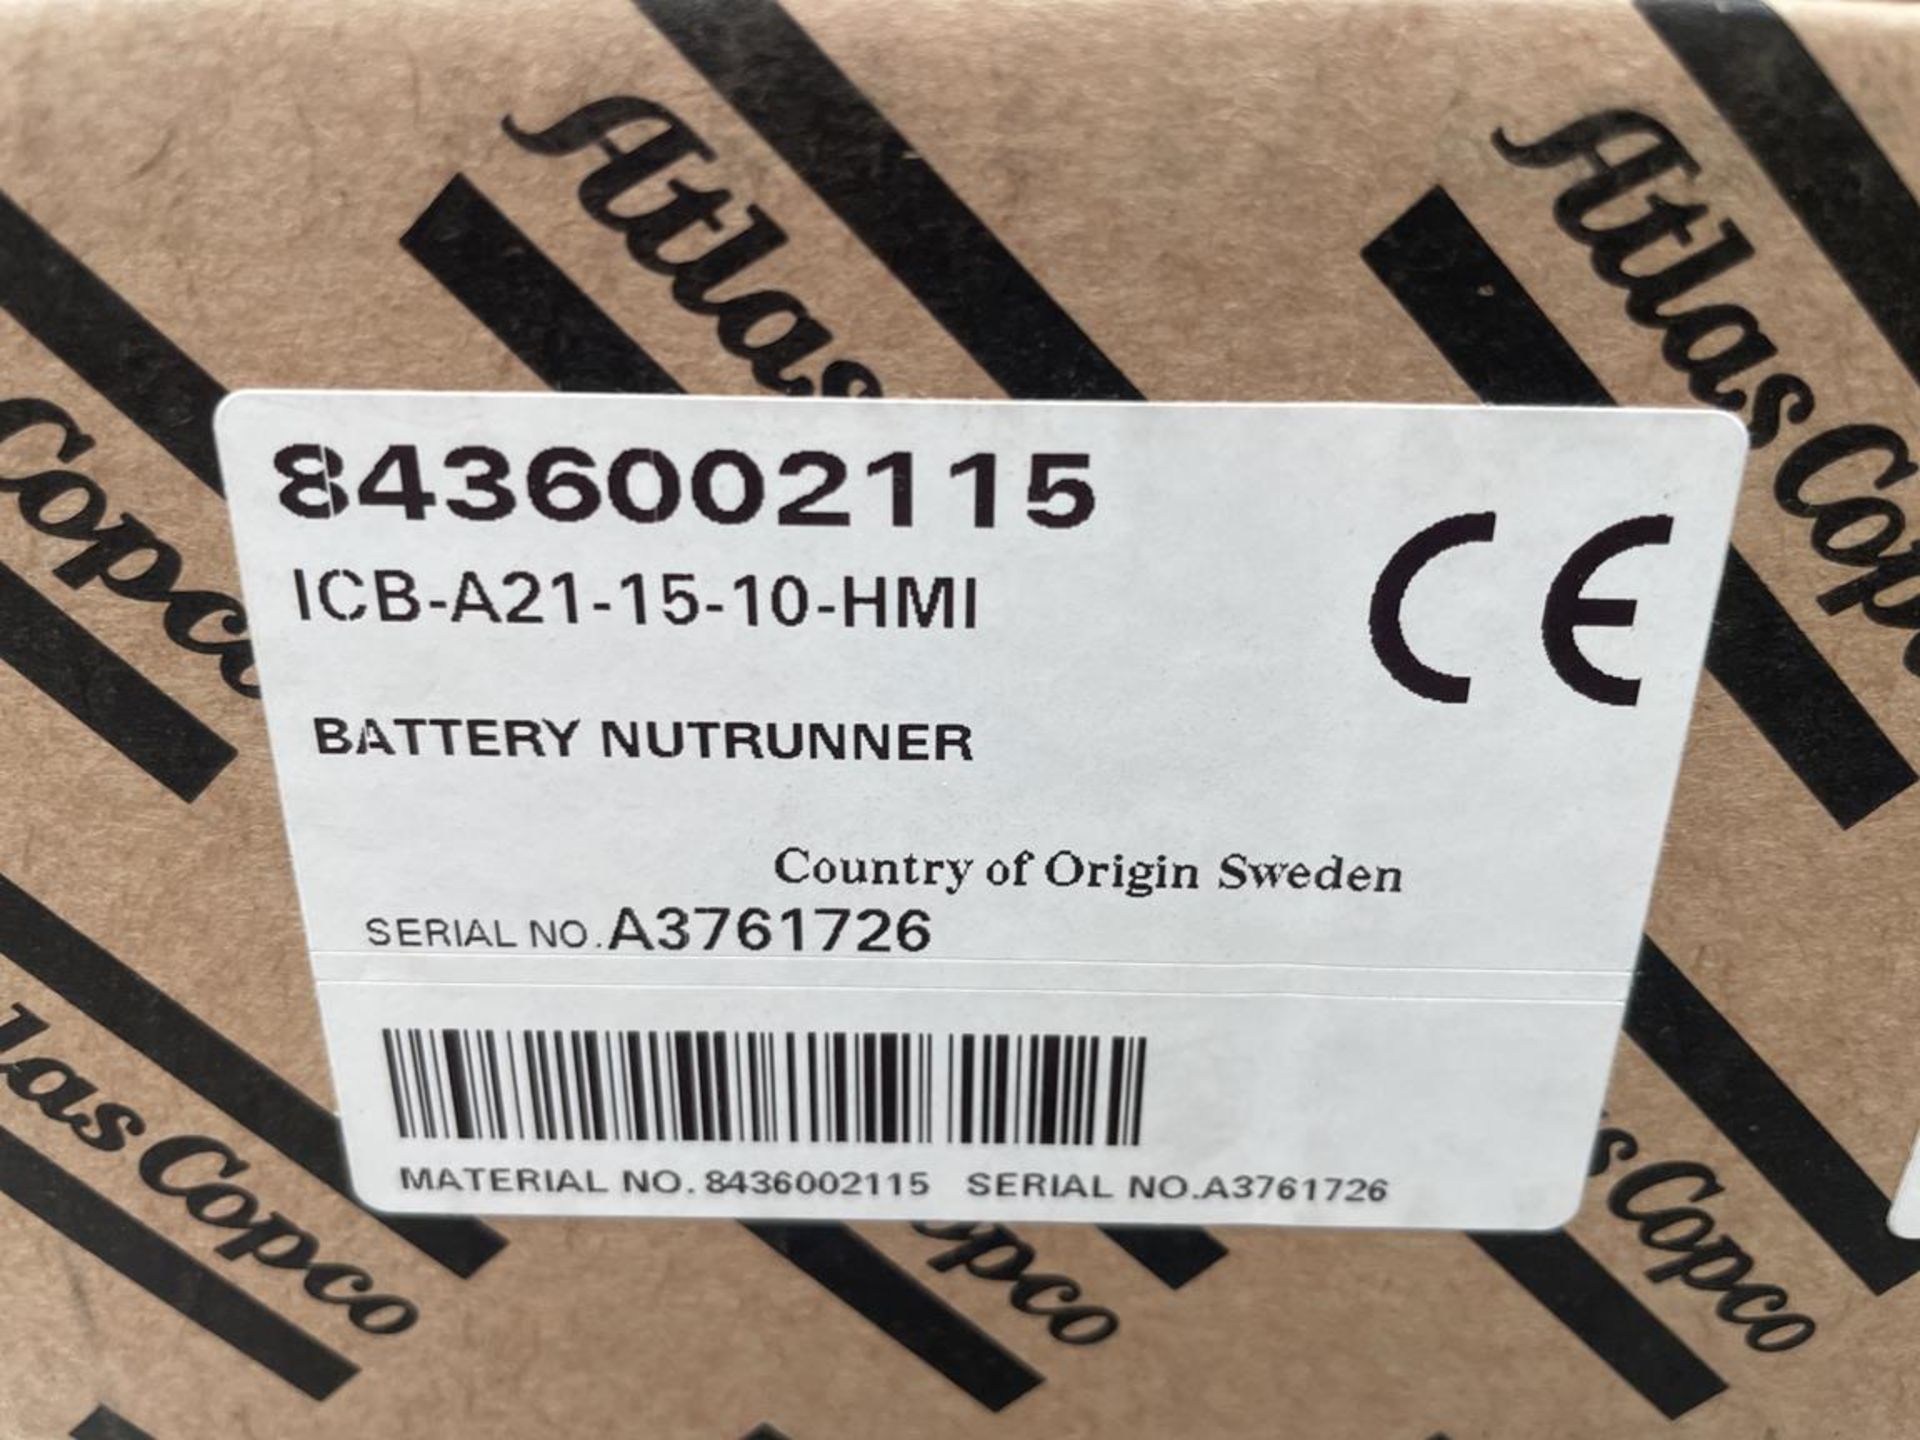 Atlas Copco, ICB-A21-15-10-HMI battery nut runner (boxed) - Image 2 of 2